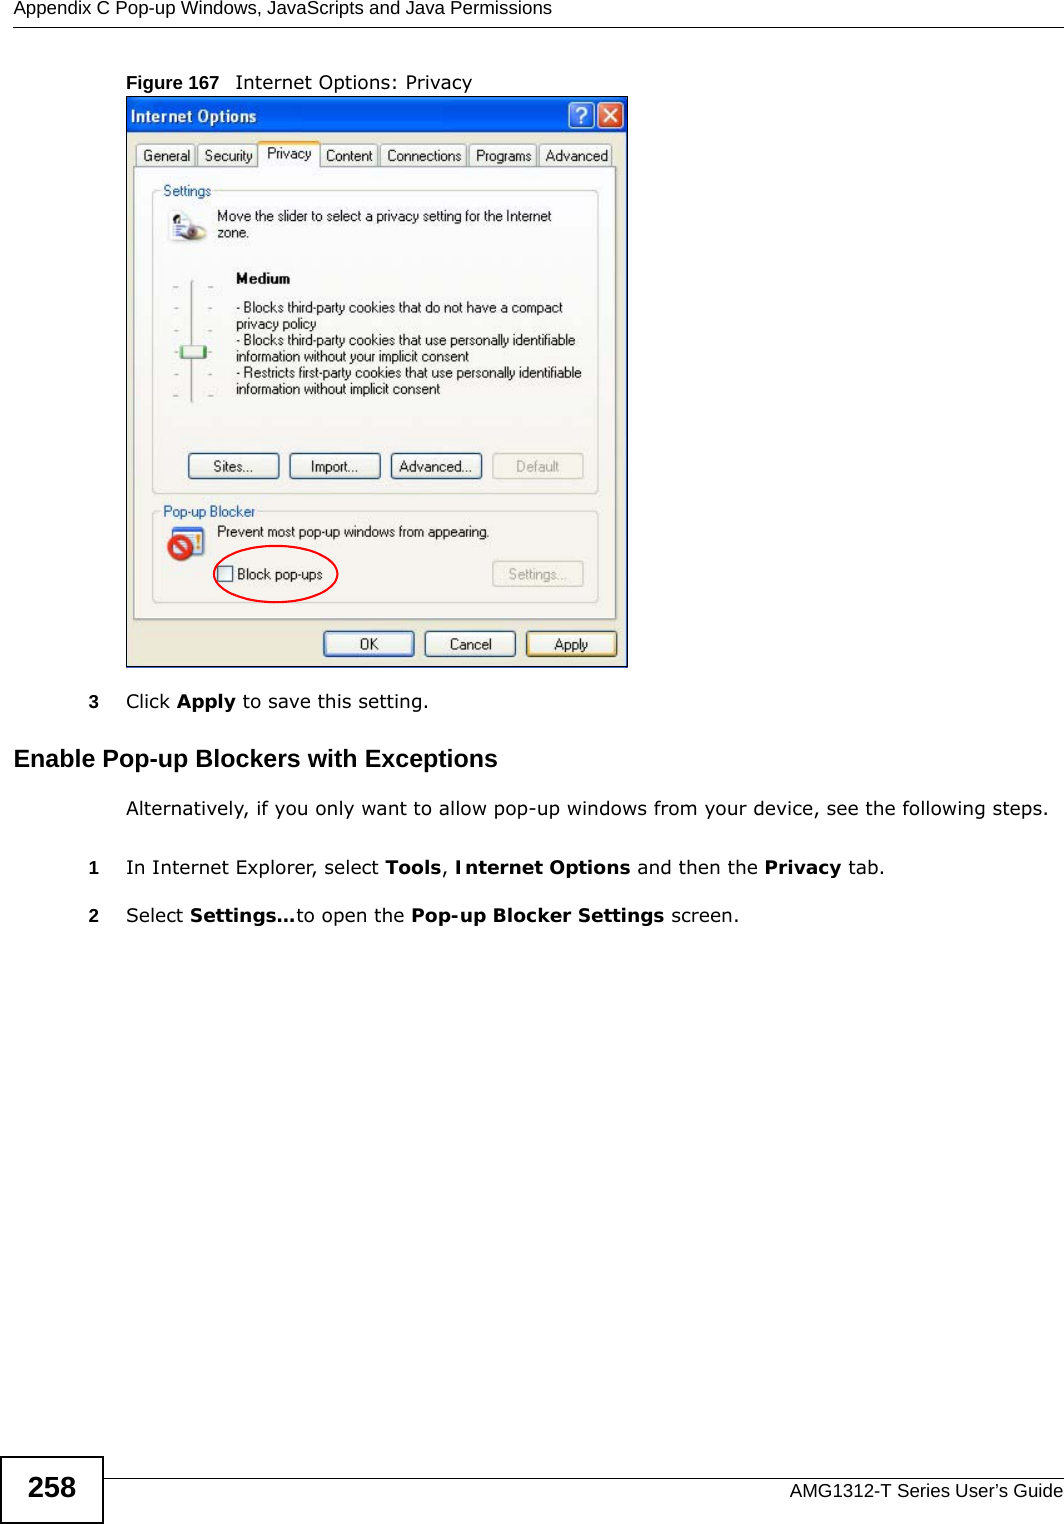 Appendix C Pop-up Windows, JavaScripts and Java PermissionsAMG1312-T Series User’s Guide258Figure 167   Internet Options: Privacy3Click Apply to save this setting.Enable Pop-up Blockers with ExceptionsAlternatively, if you only want to allow pop-up windows from your device, see the following steps.1In Internet Explorer, select Tools, Internet Options and then the Privacy tab. 2Select Settings…to open the Pop-up Blocker Settings screen.